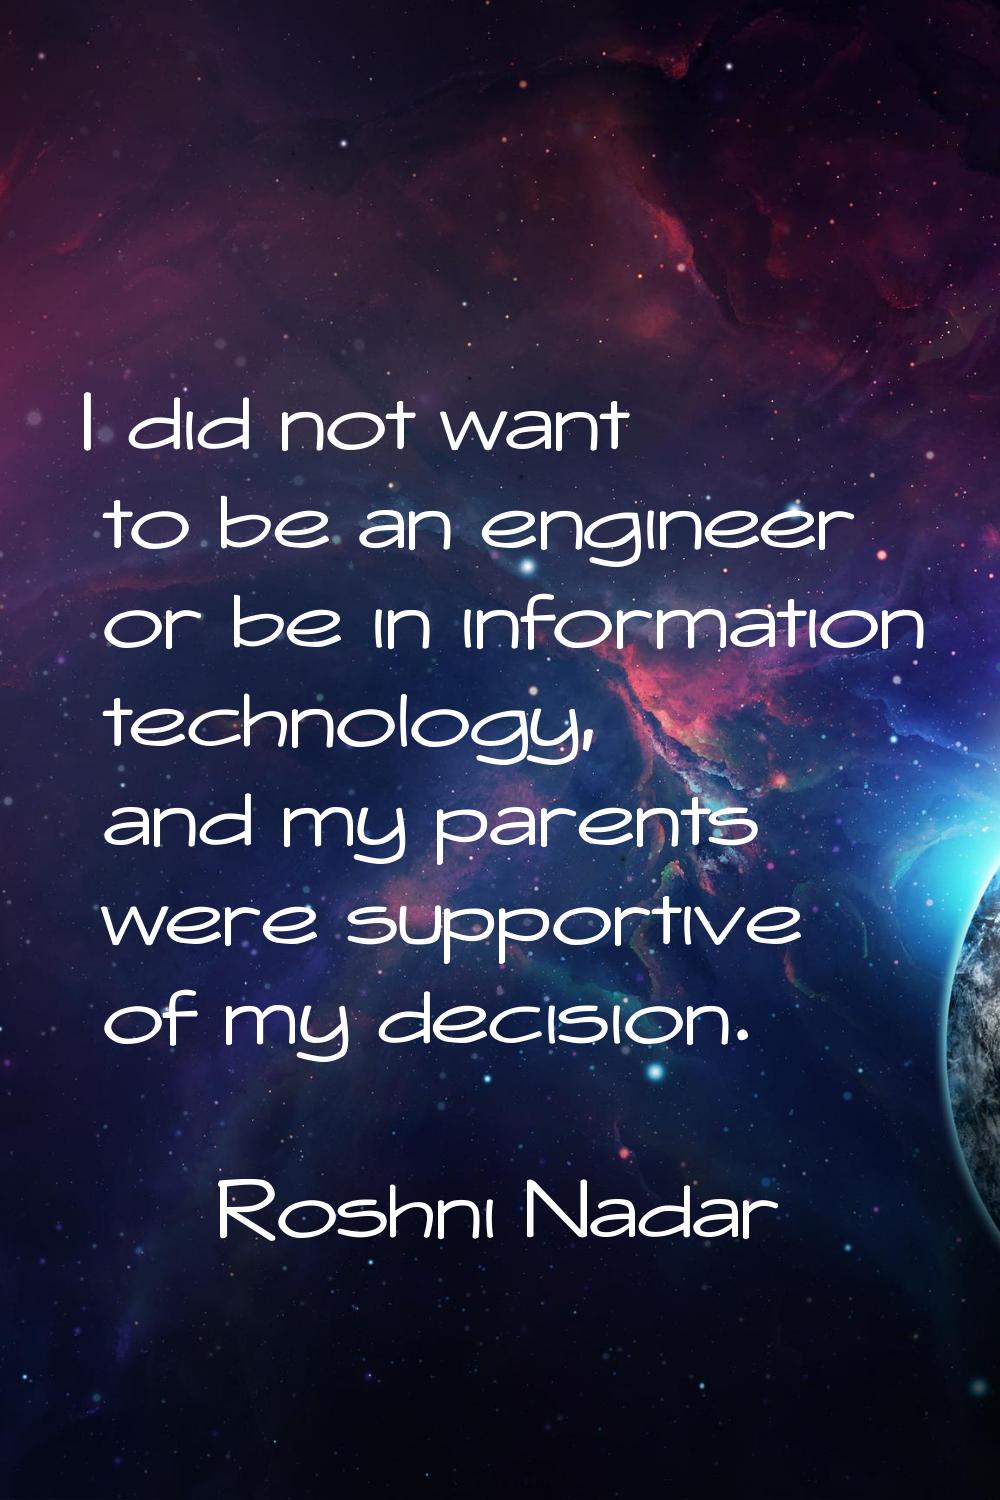 I did not want to be an engineer or be in information technology, and my parents were supportive of